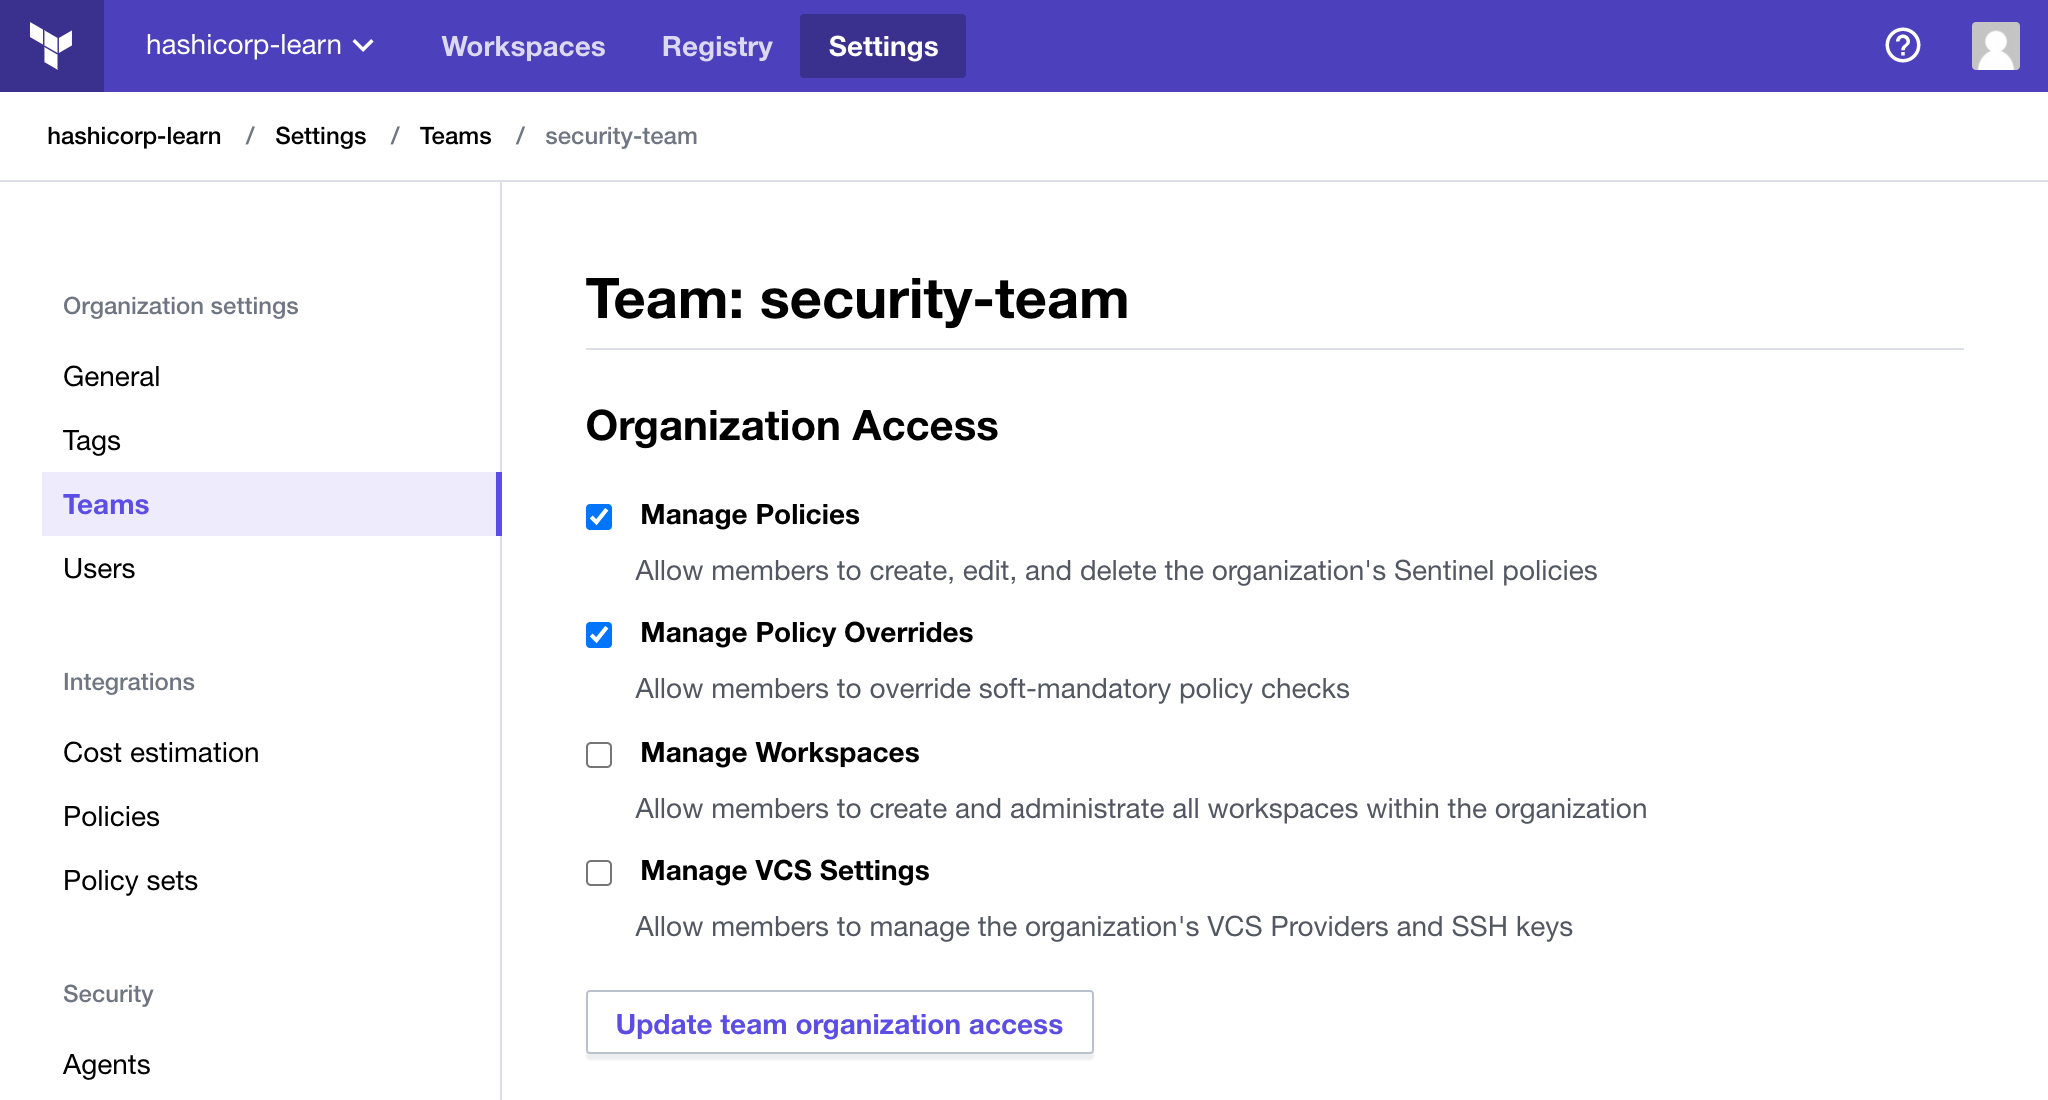 Security team settings page. The security team can manage policies and policy overrides